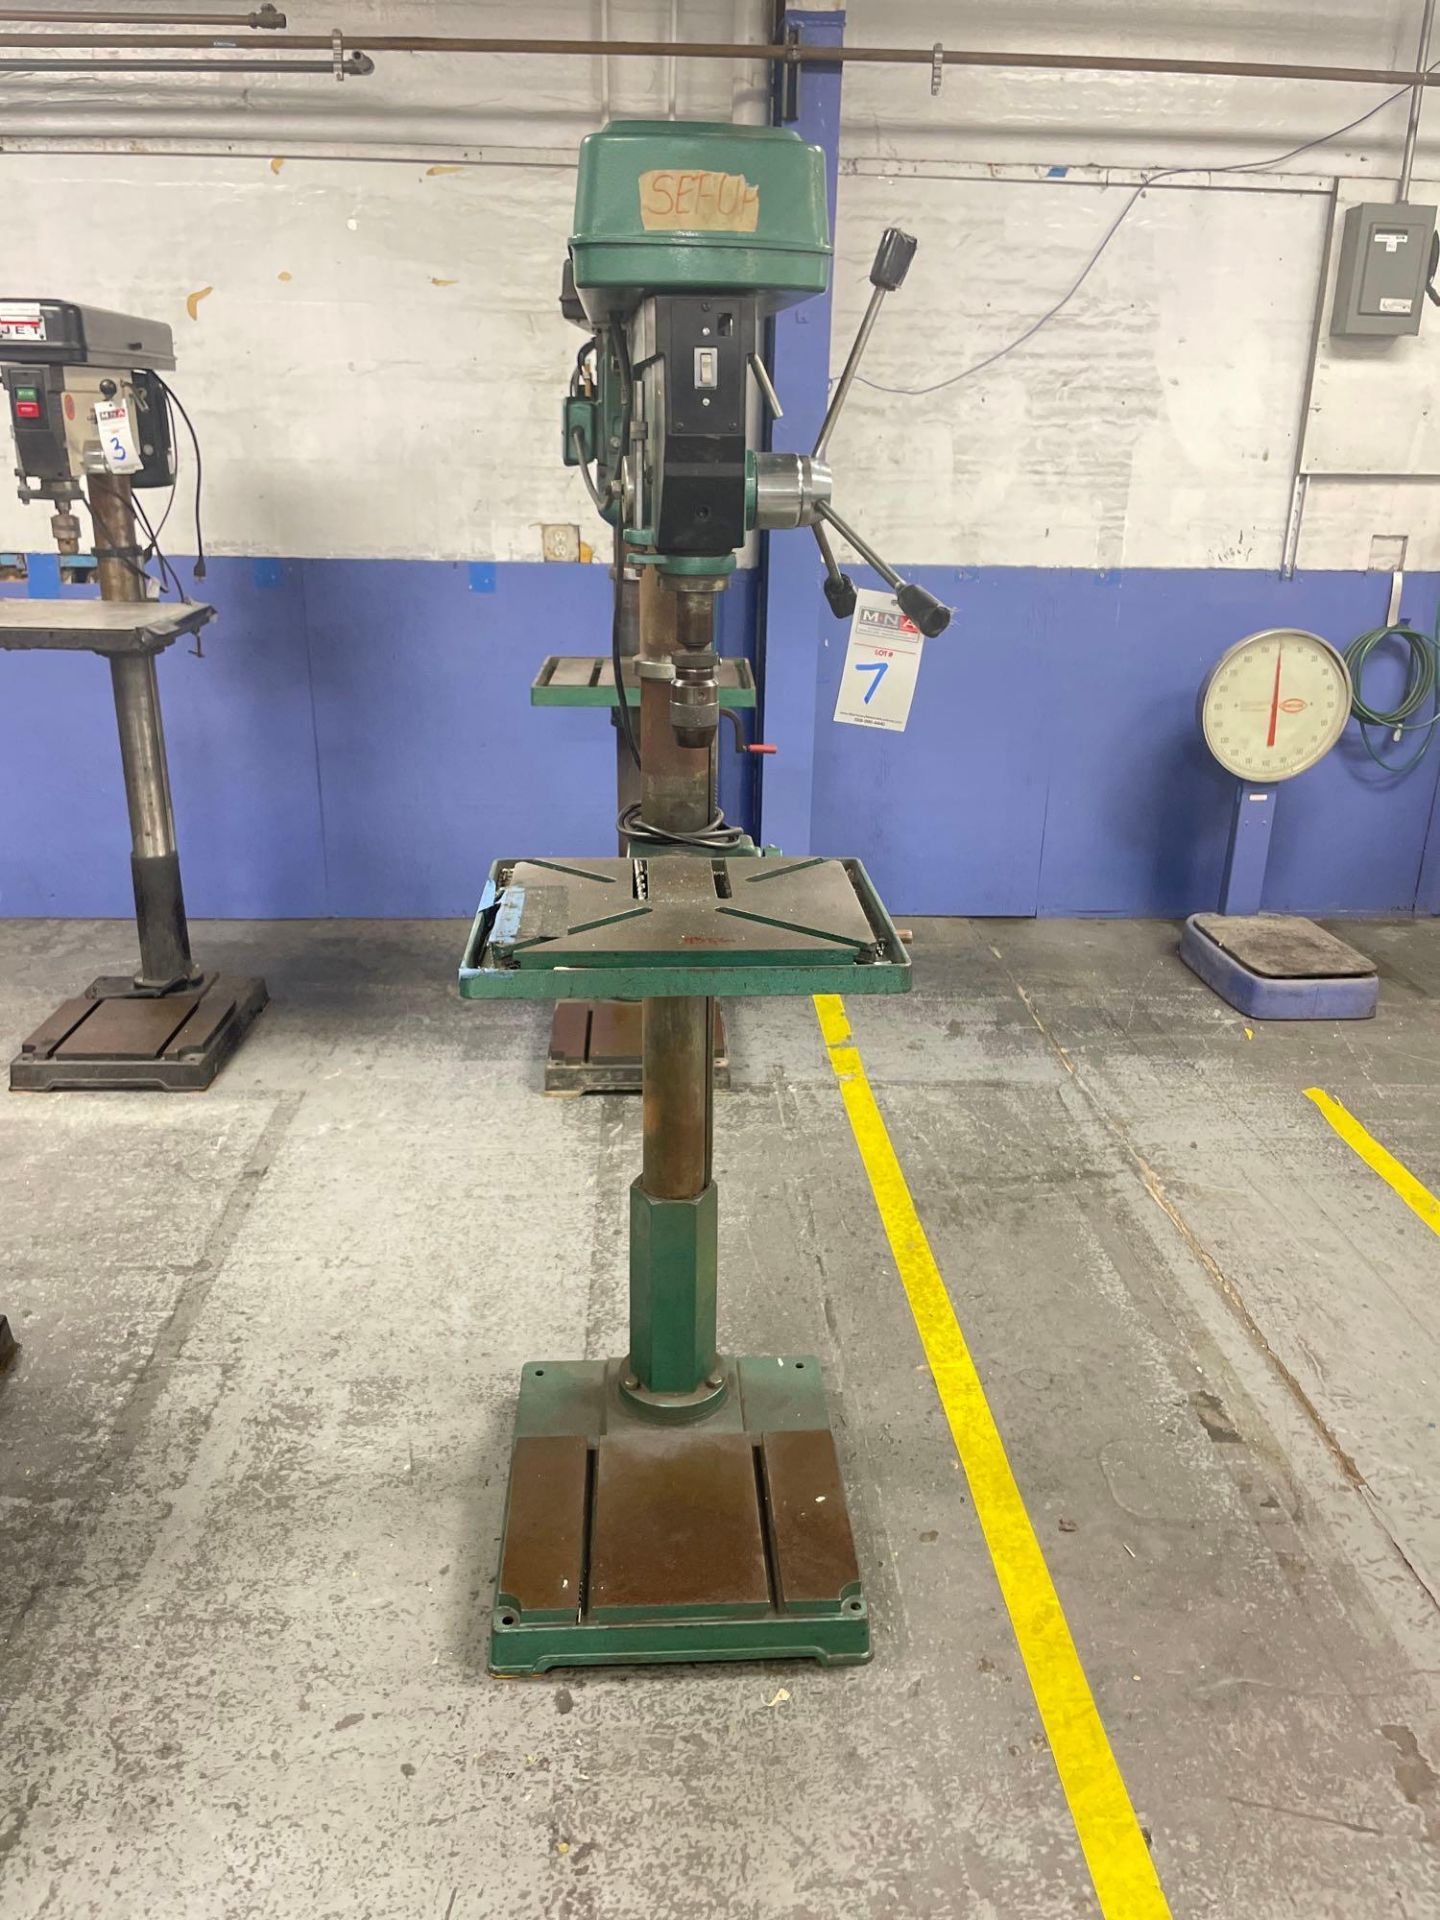 Grizzly G0482 Drill Press